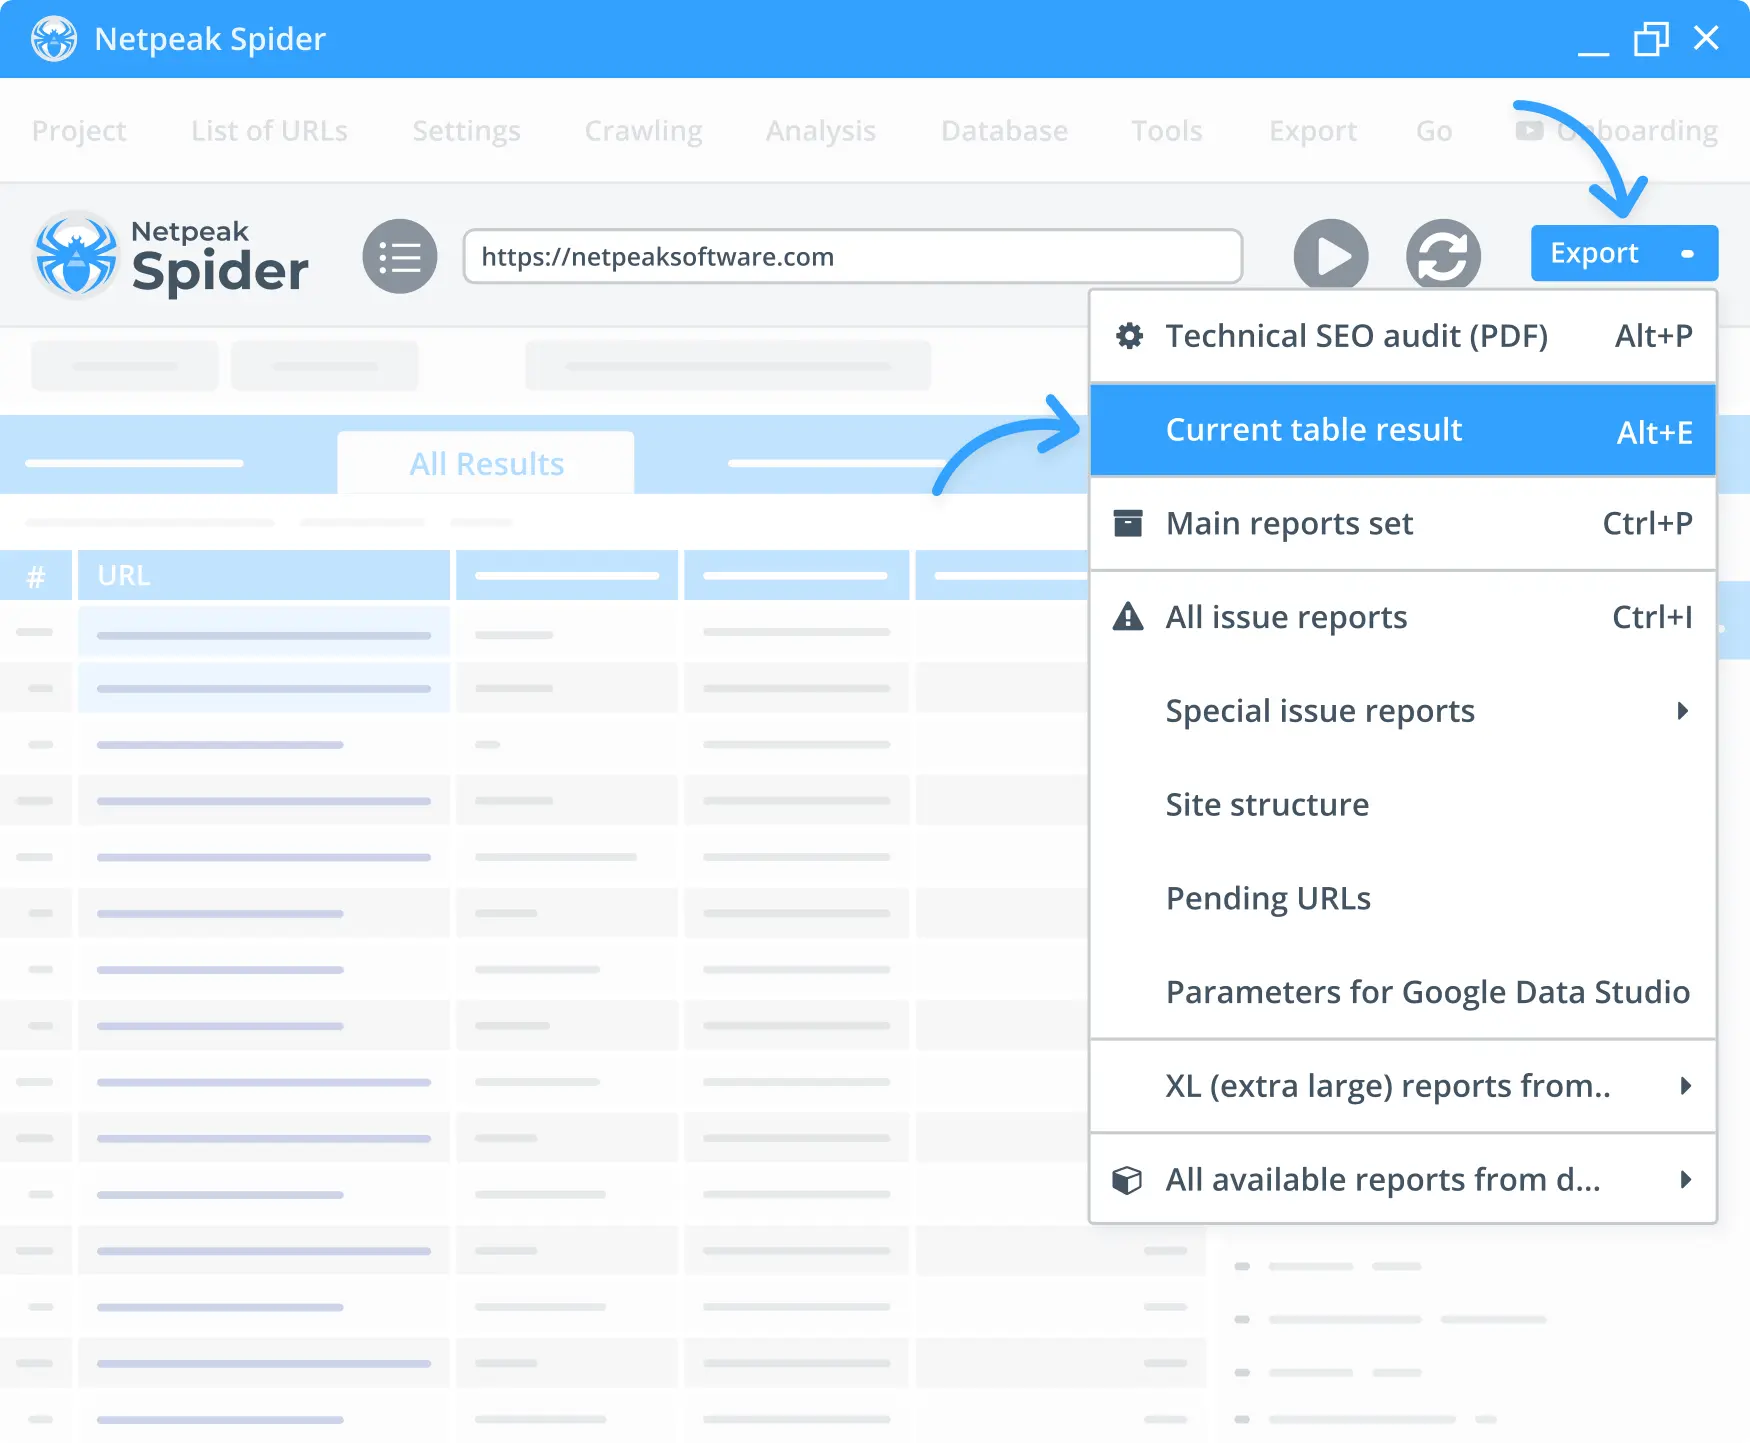 Obtaining onpage SEO tools results in the Netpeak Spider.